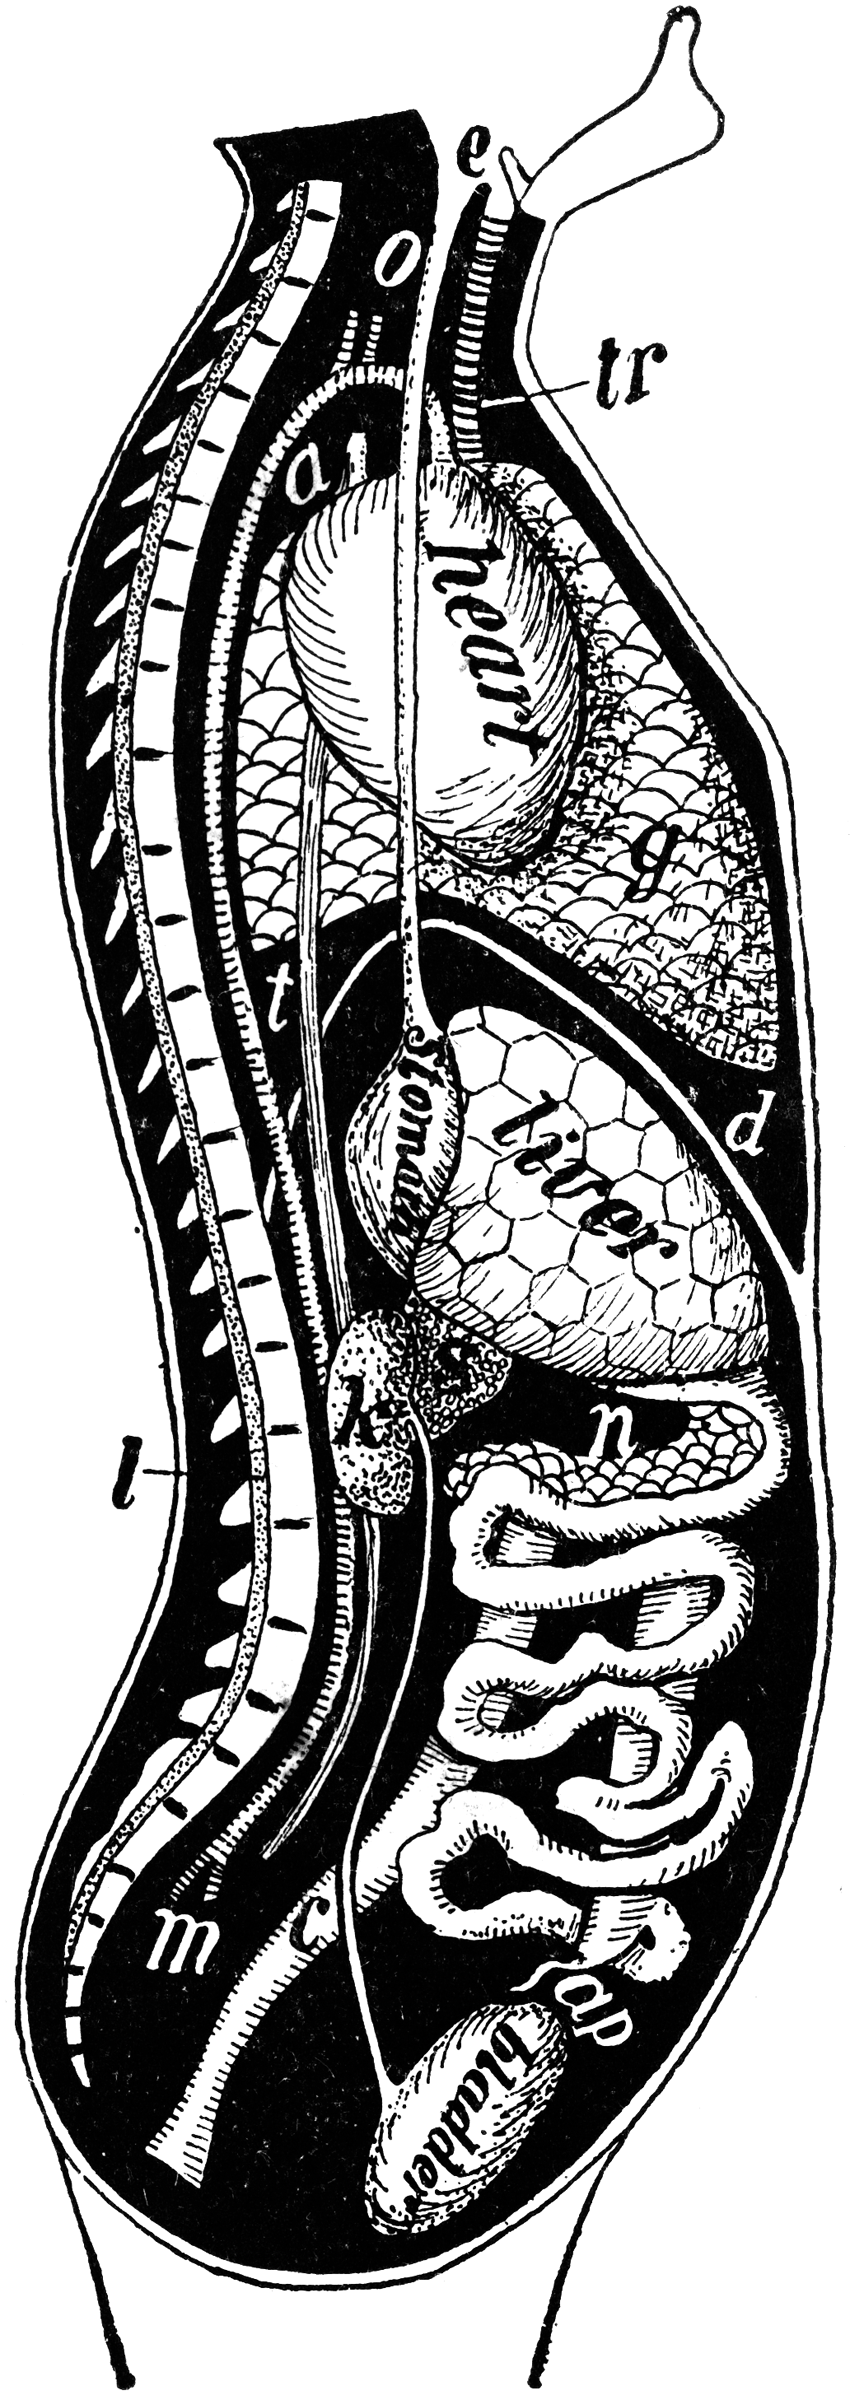 View of Organs from the Side | ClipArt ETC